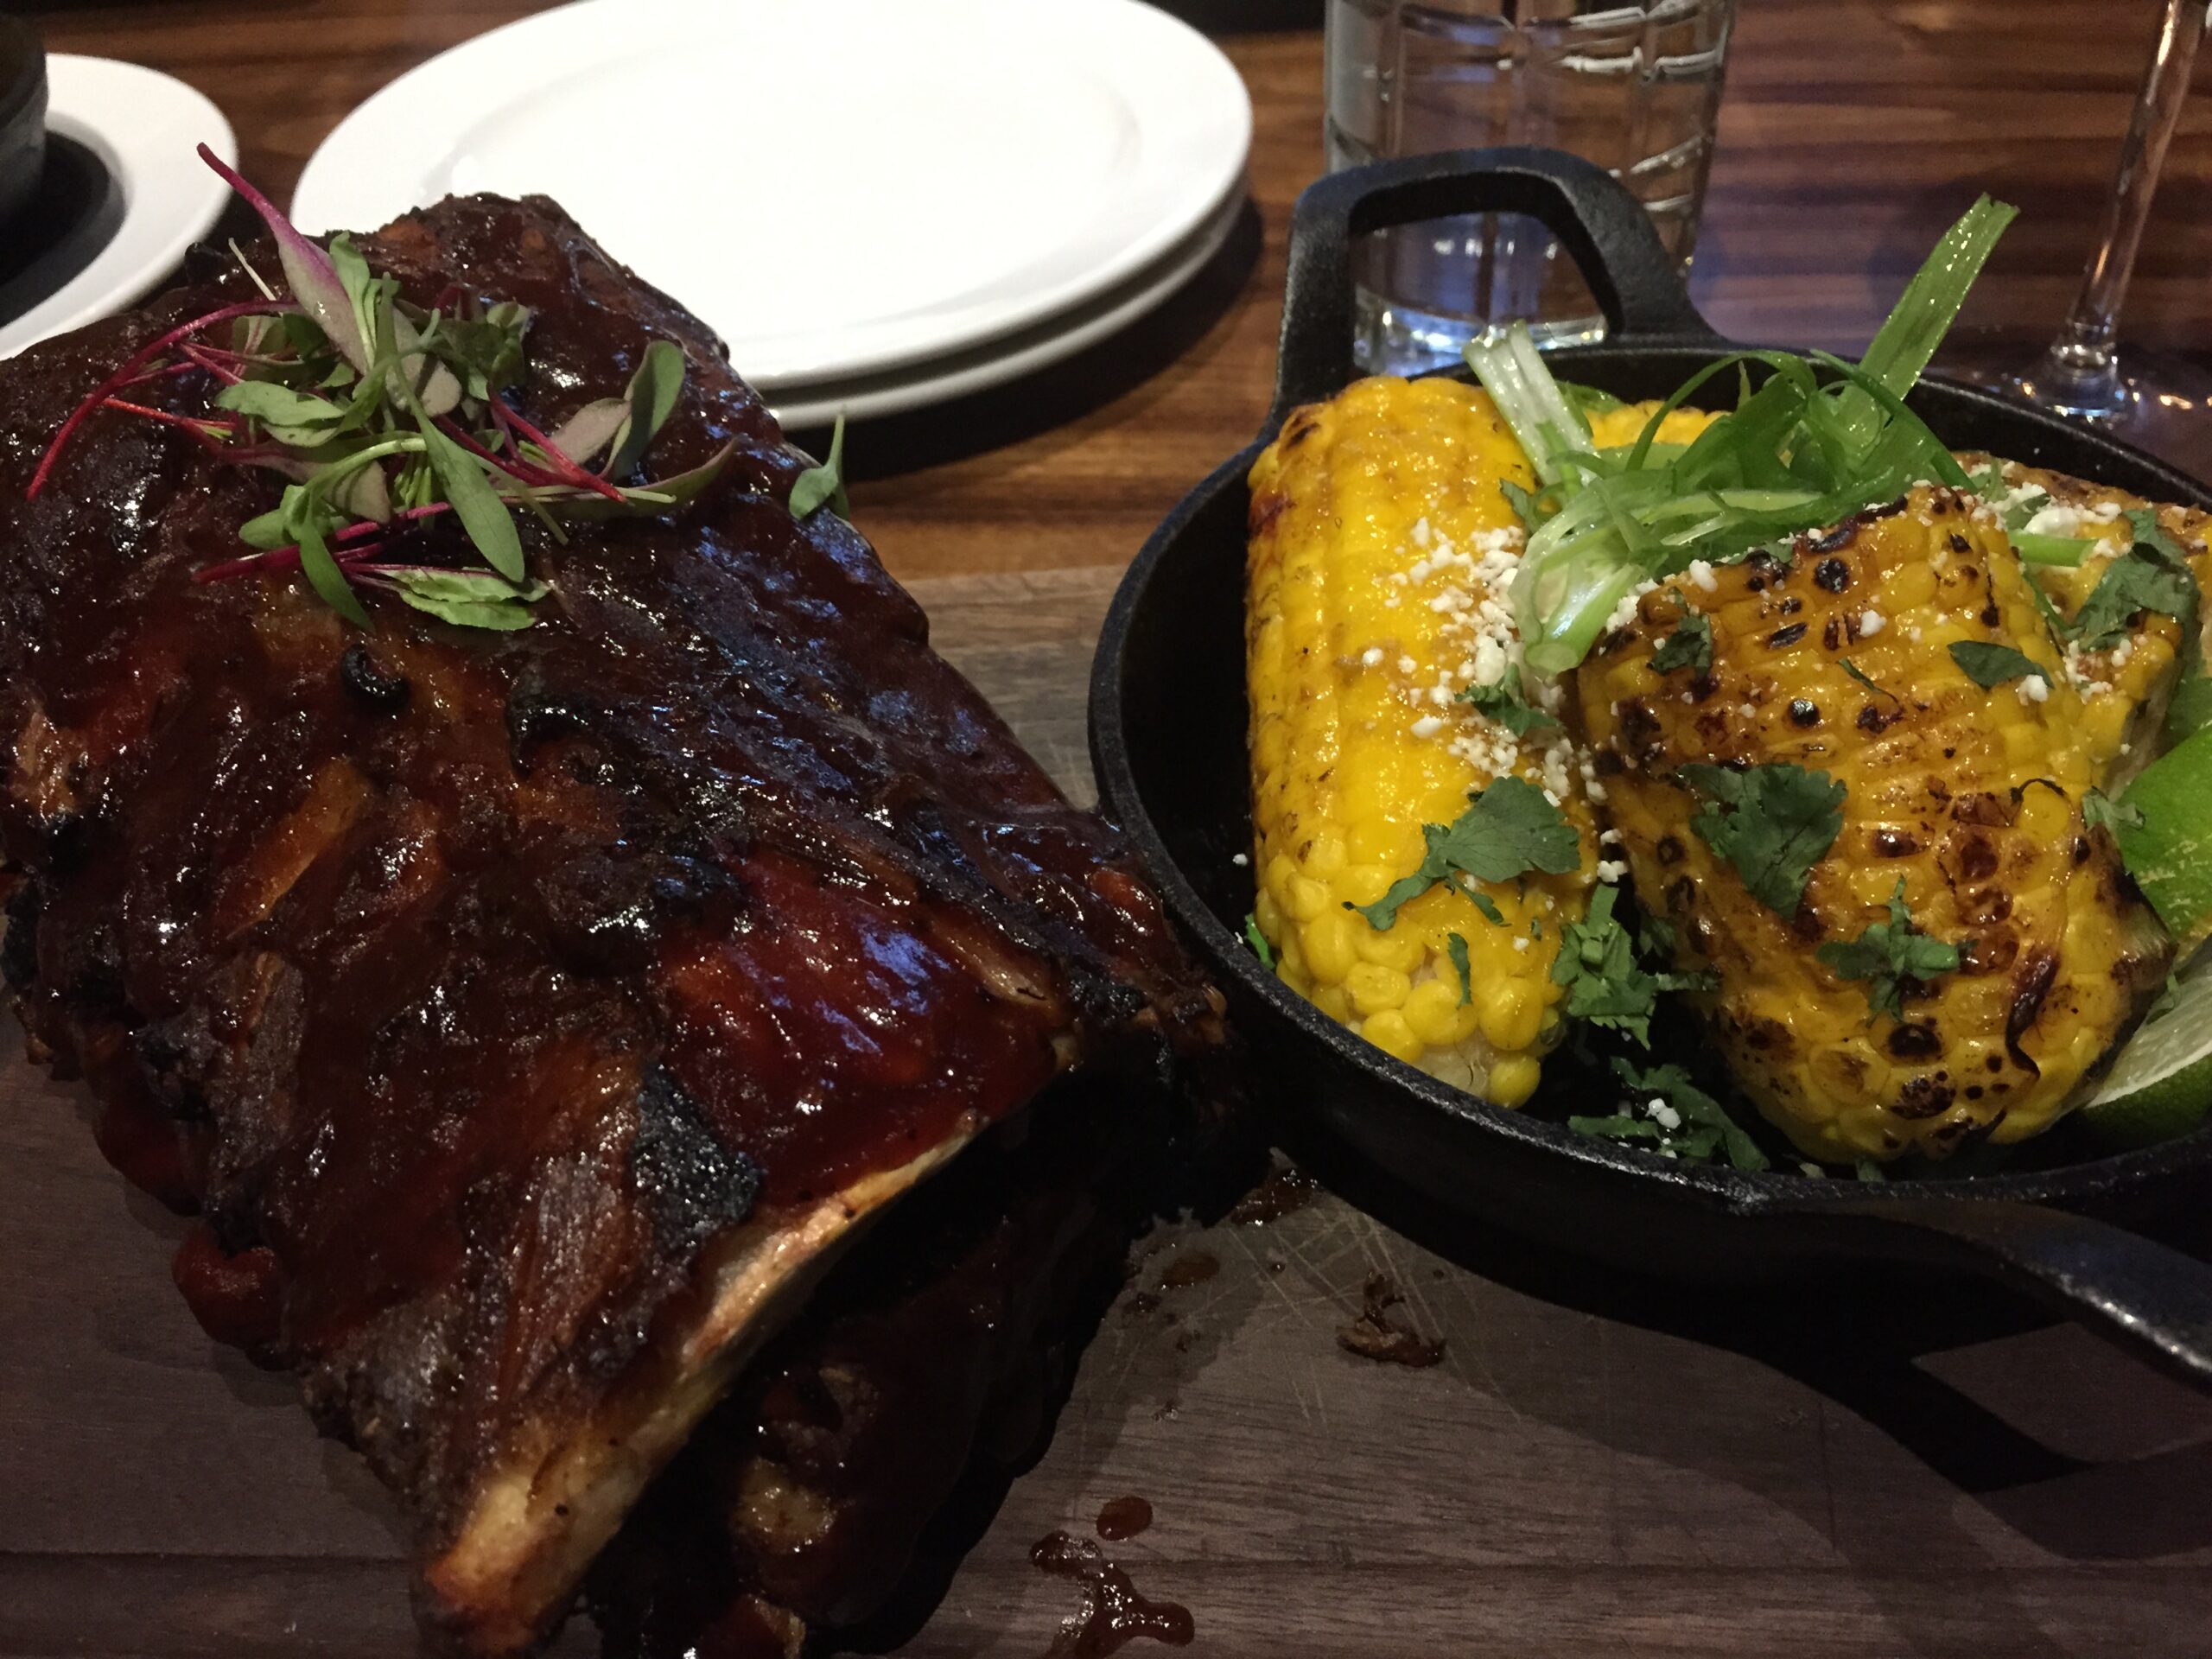 These Sweet and Sticky Chipotle Baby Back Ribs are an instant classic not to be missed paired with the side dish of Grilled Corn on the cob that is dressed up with cotija cheese, cilantro, and jalapeno butter at Willard Hicks in historic downtown Campbell, California. (Photo: Super G)